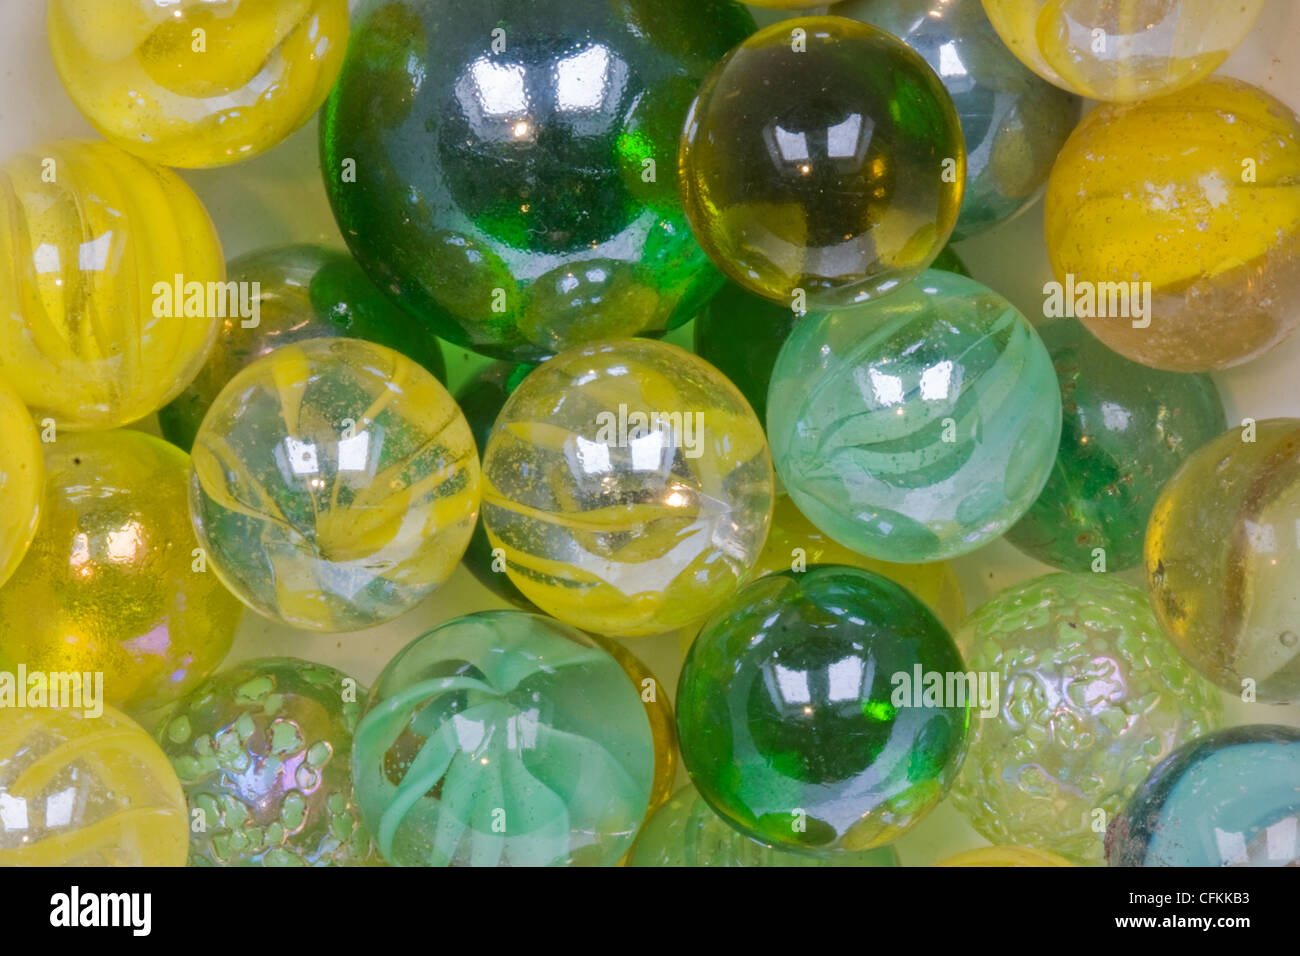 Yellow and green glass marbles Stock Photo